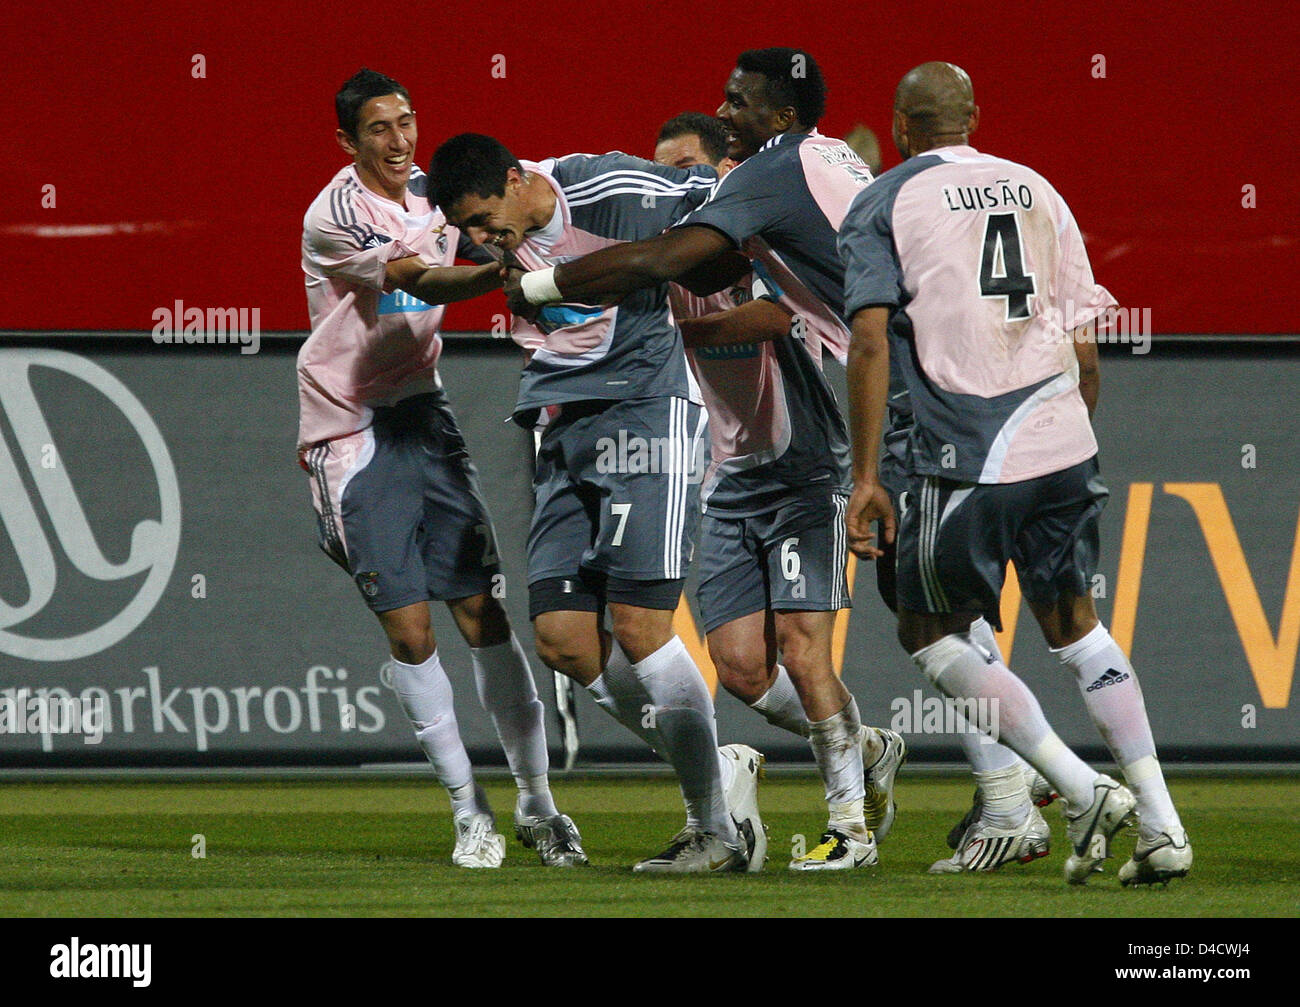 Benfica's 2-1 scorer Oscar Cardozo (2-L) celebrates with his team-mates (L-R) Angel di Maria, Petit, Ariza Makukula and Luisaol during the UEFA Cup round of 16 2nd leg 1.FC Nuremberg v Benfica Lisbon at easyCredit stadium of Nuremberg, Germany, 21 February 2008. The match ended in a 2-2 draw, Benfica moves up to quarter-finals winning 3-2 on aggregate. Photo: Daniel Karmann Stock Photo